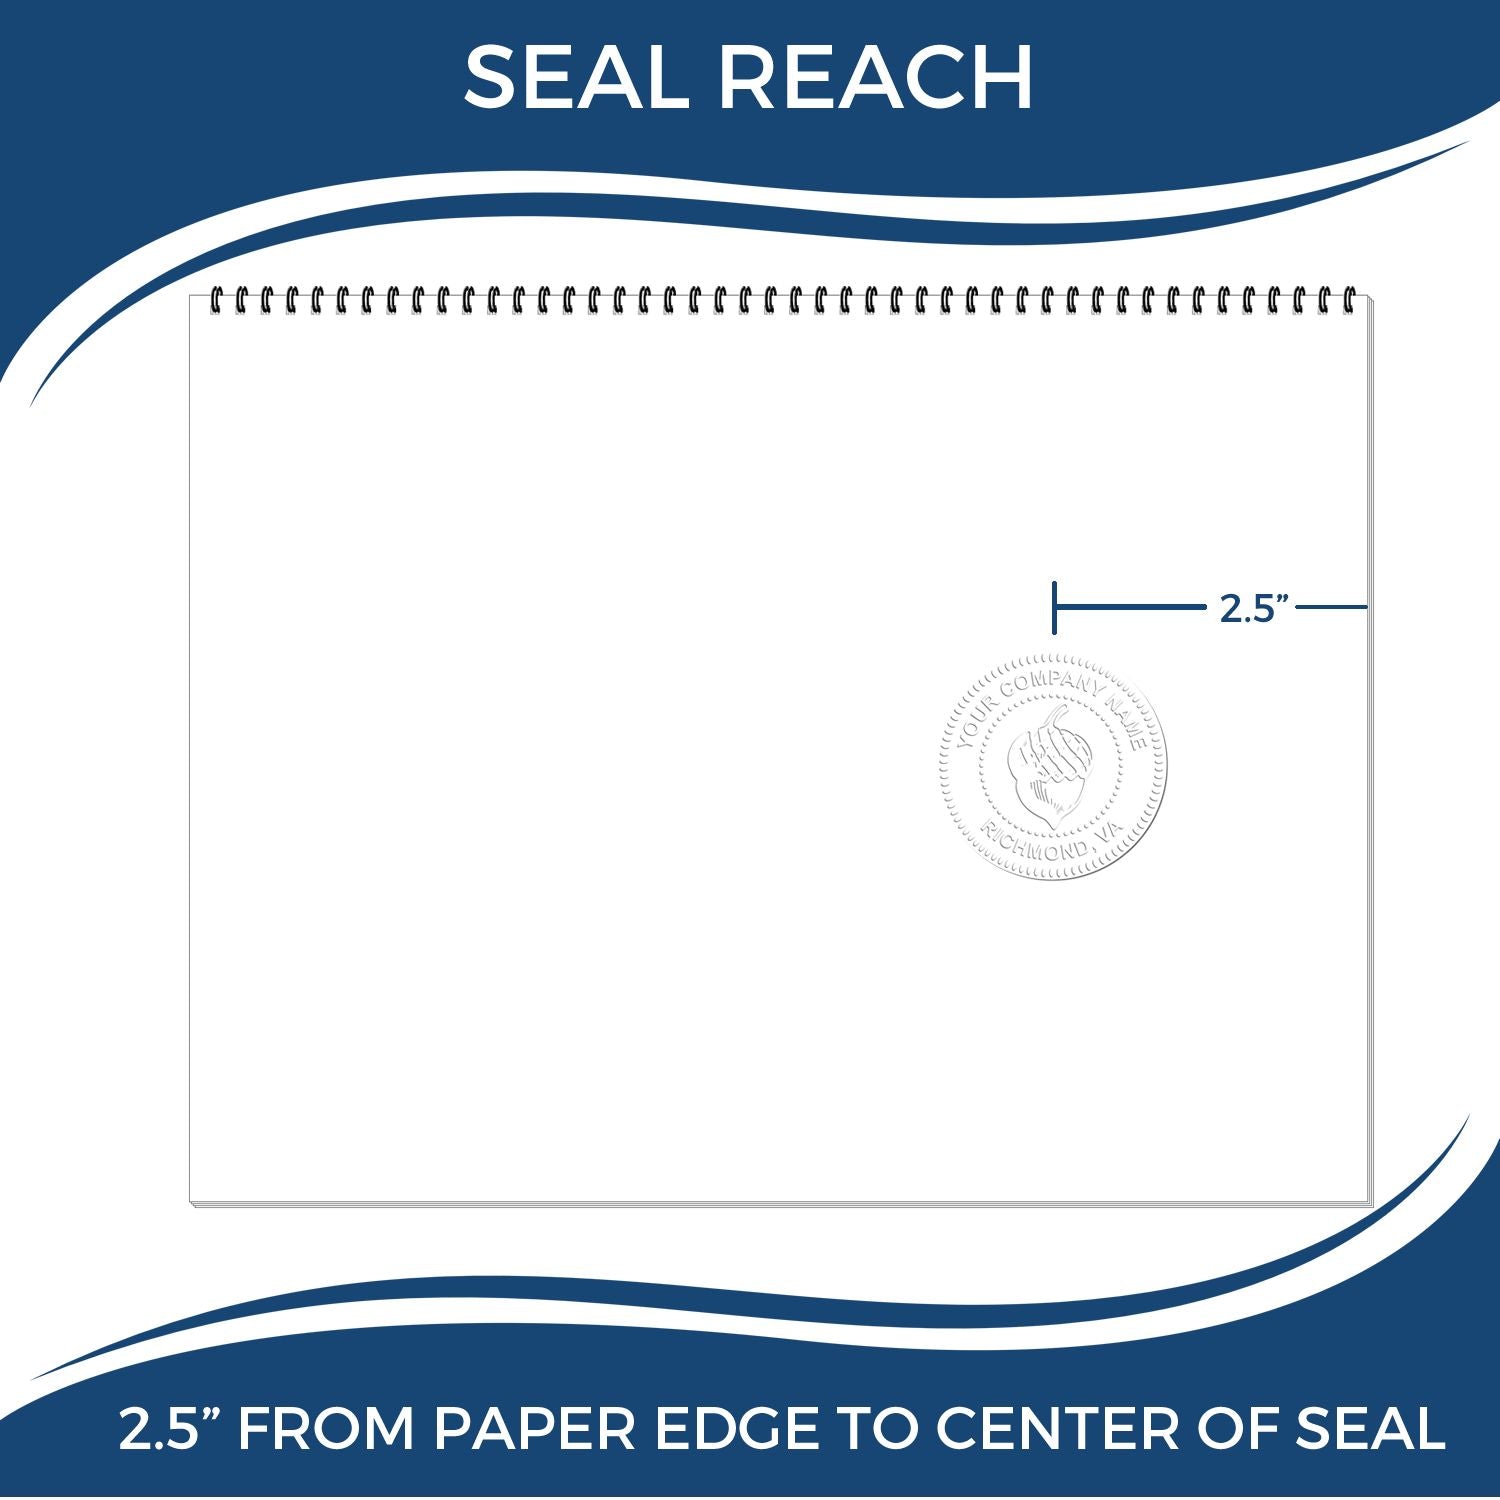 An infographic showing the seal reach which is represented by a ruler and a miniature seal image of the Heavy Duty Cast Iron Wisconsin Engineer Seal Embosser